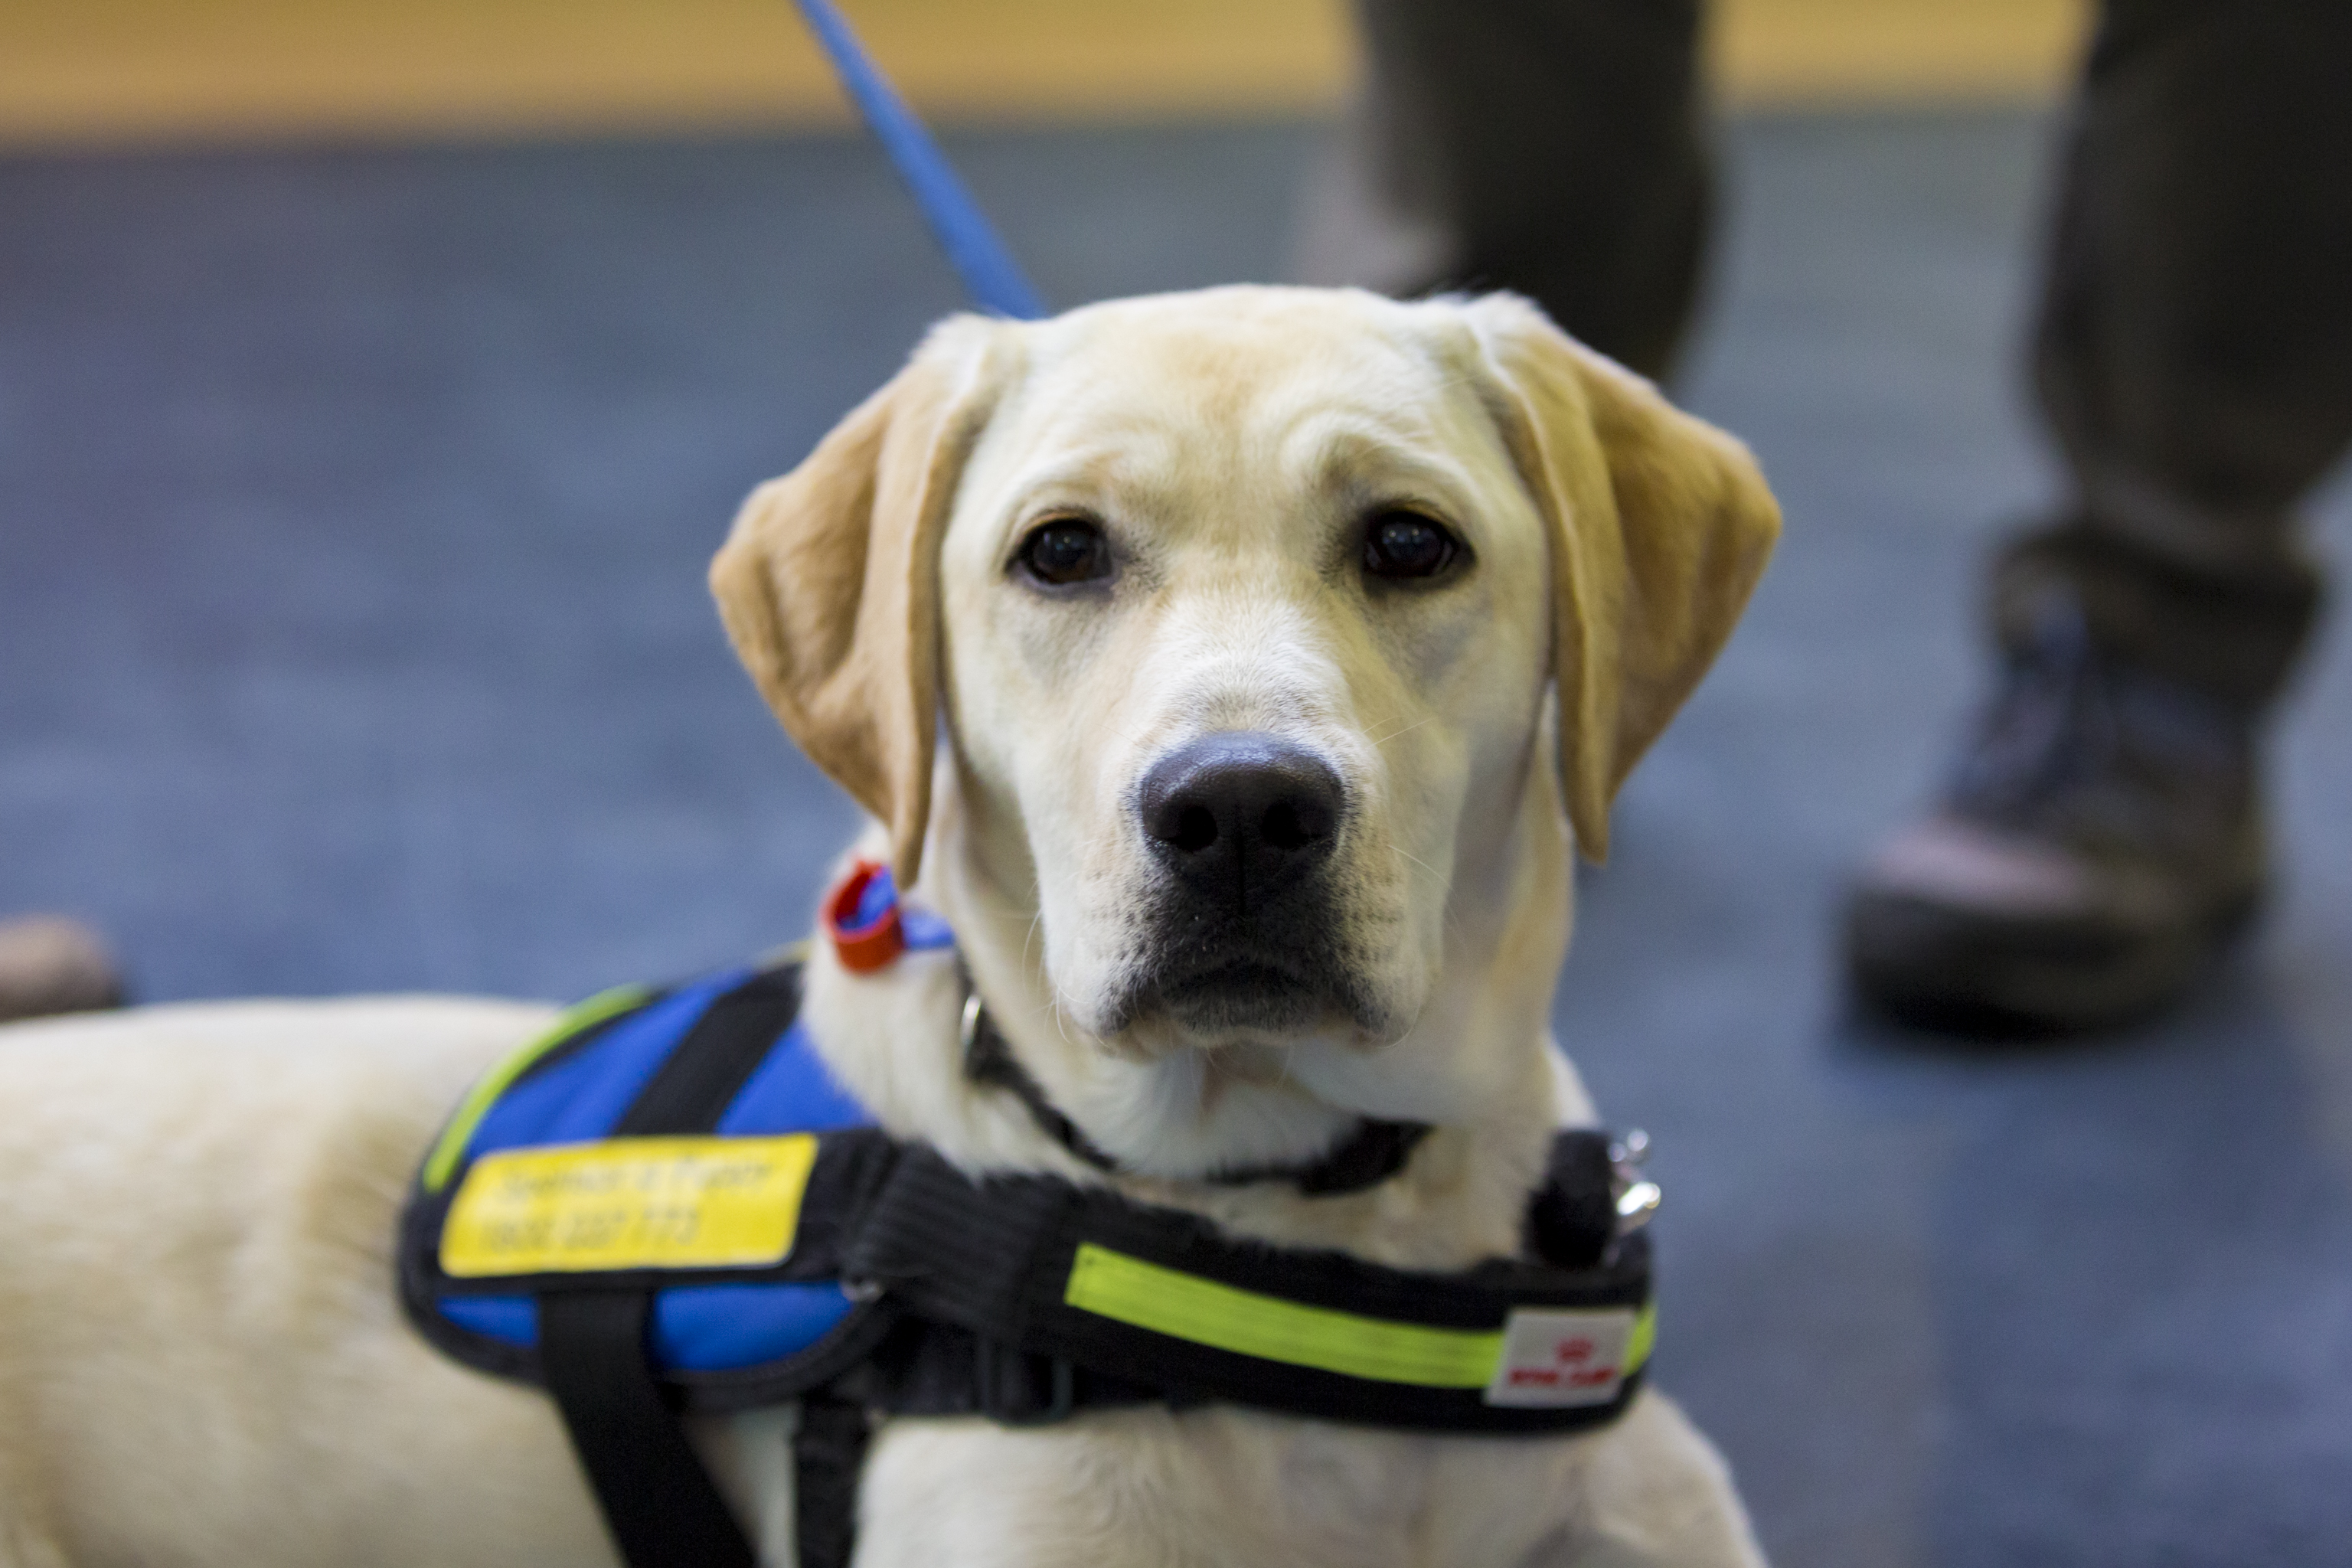 A Golden Retriever Seeing Eye Dog in training harness looking straight at camera.